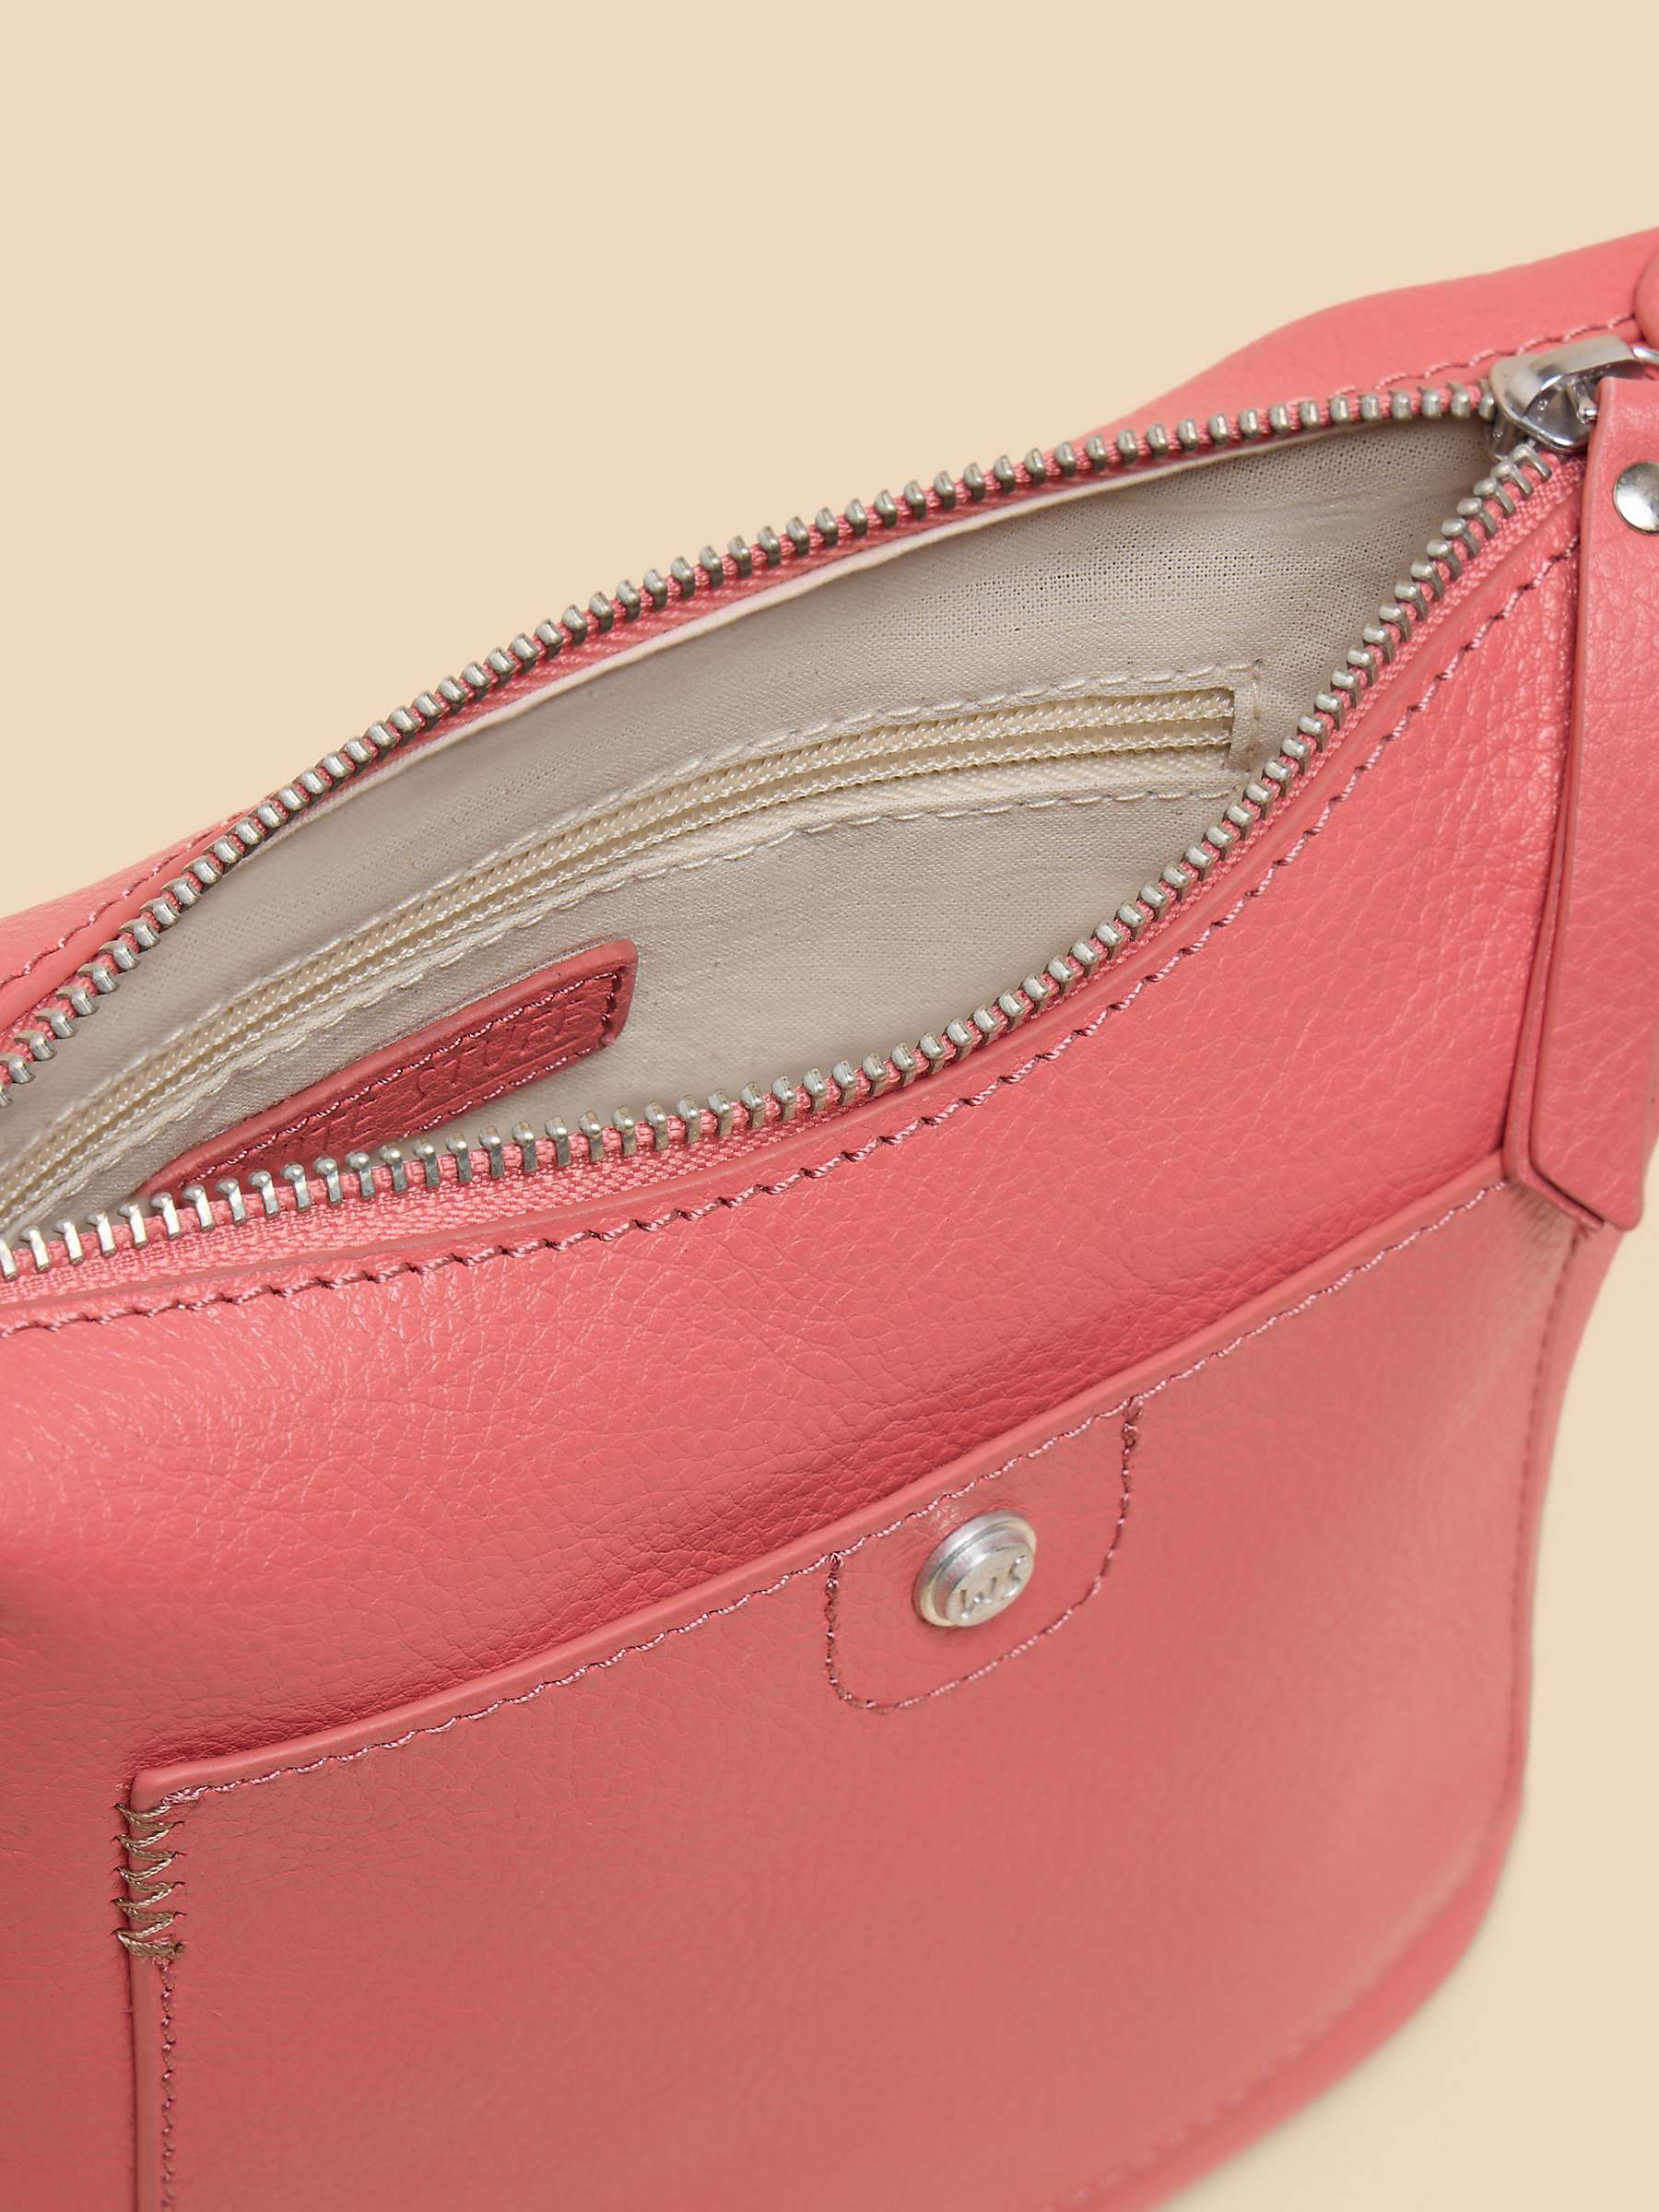 Buy White Stuff Mini Leather Crossbody Bag, Mid Coral Online at johnlewis.com